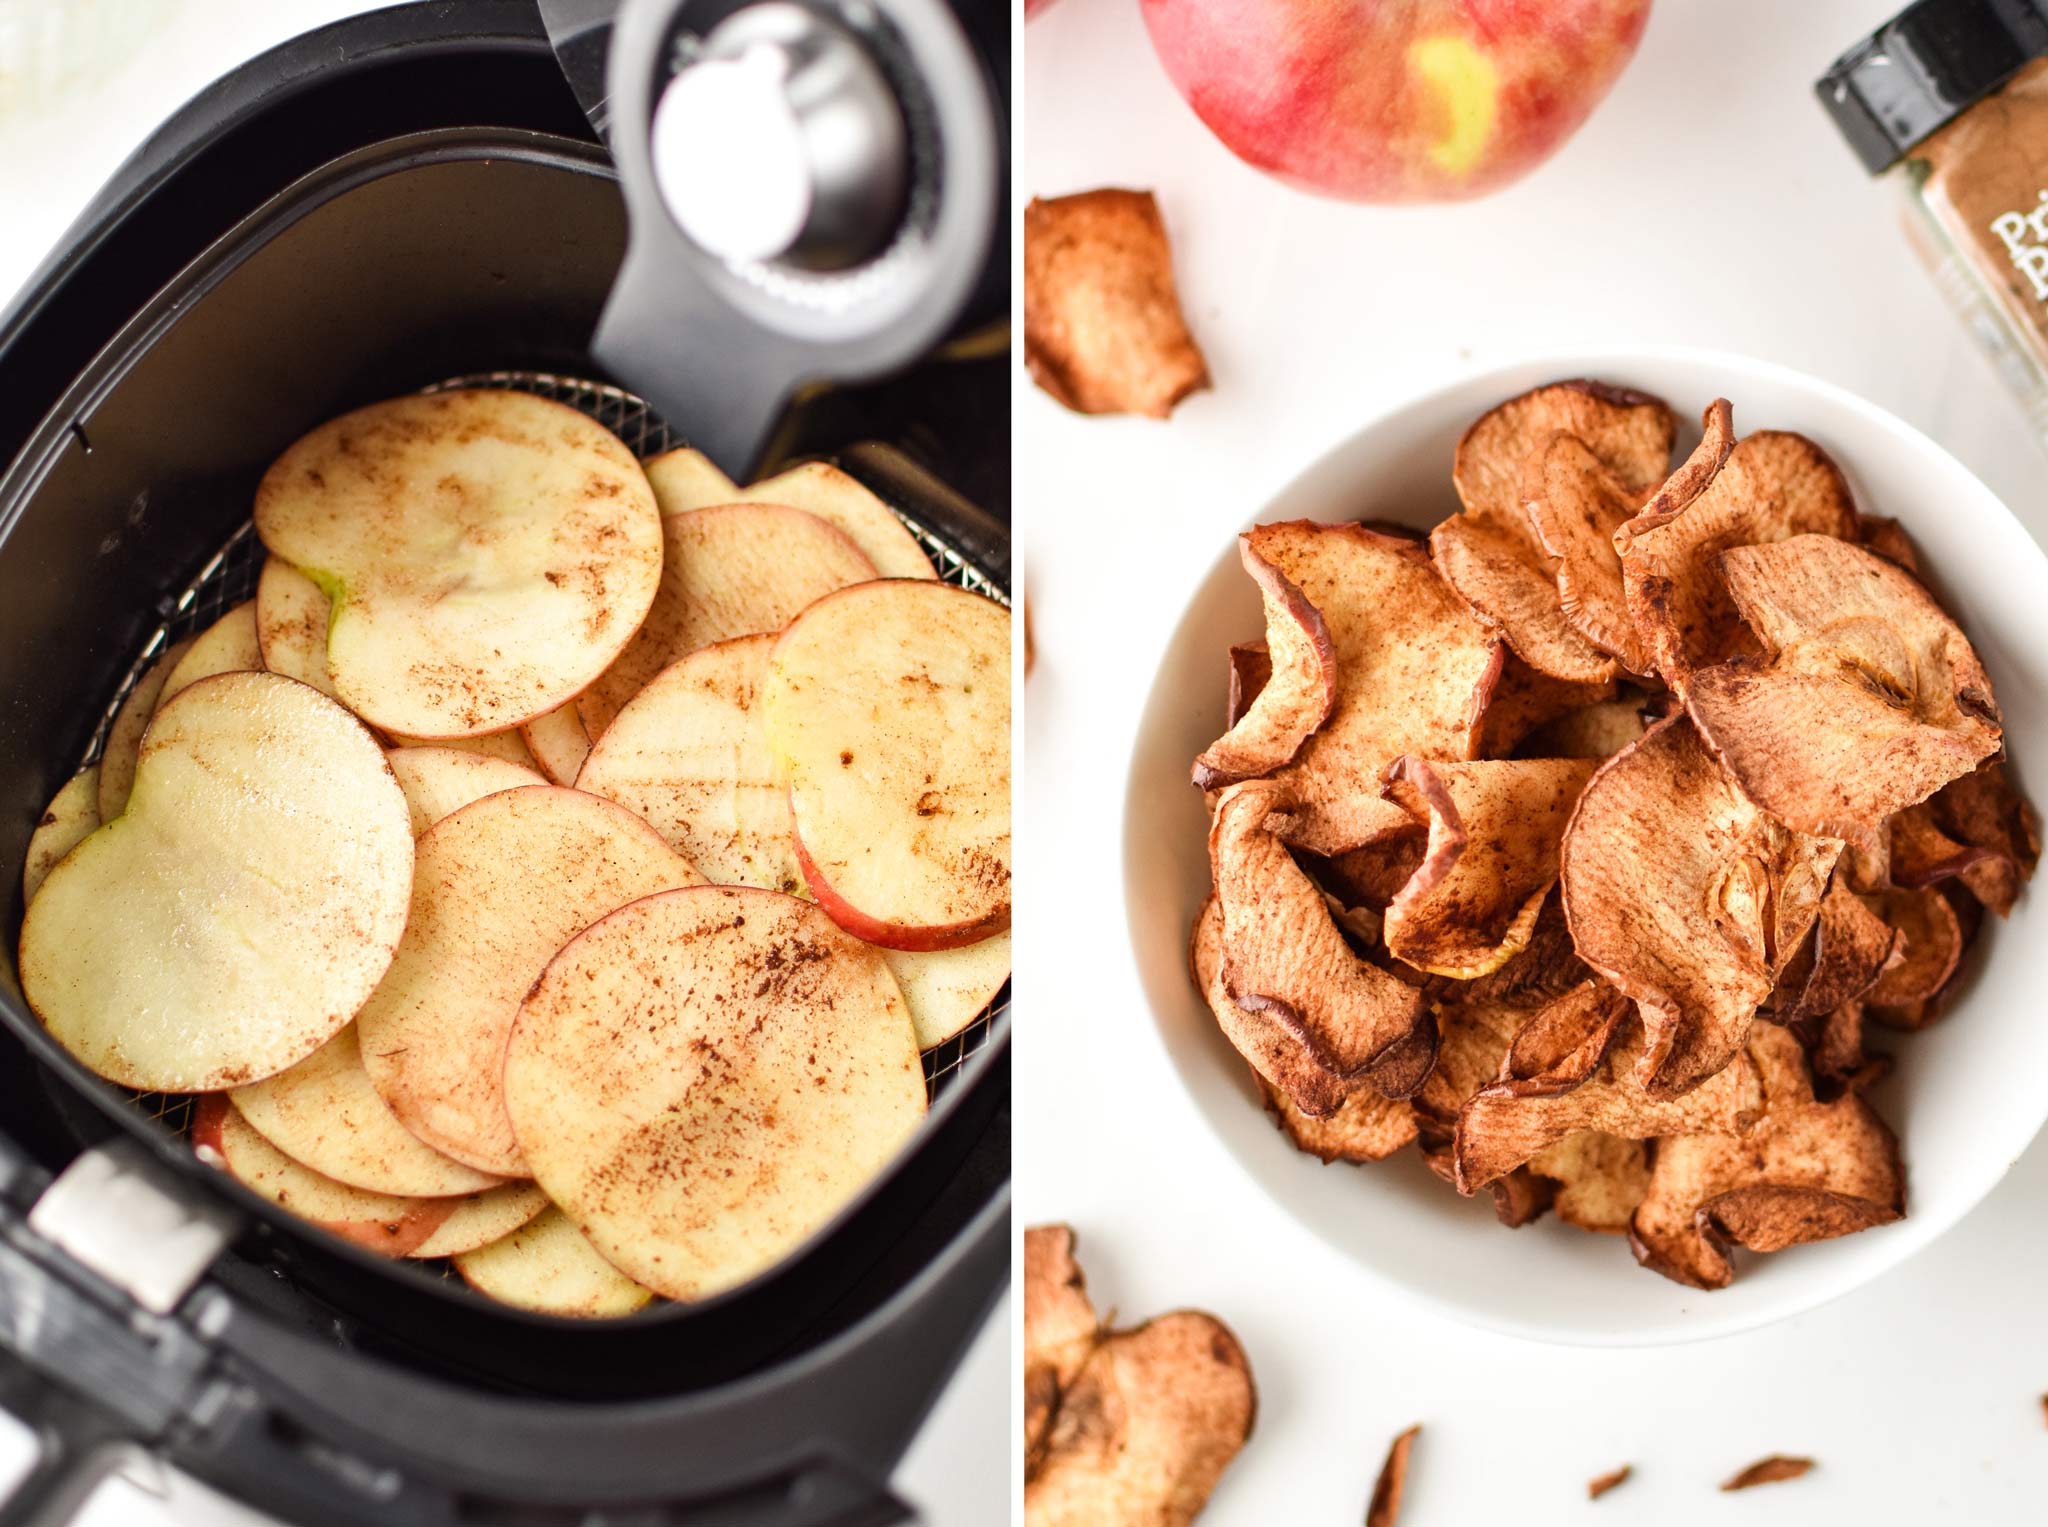 making apple chips in your air fryer isn't difficult - use one apple at a time and season with cinnamon!